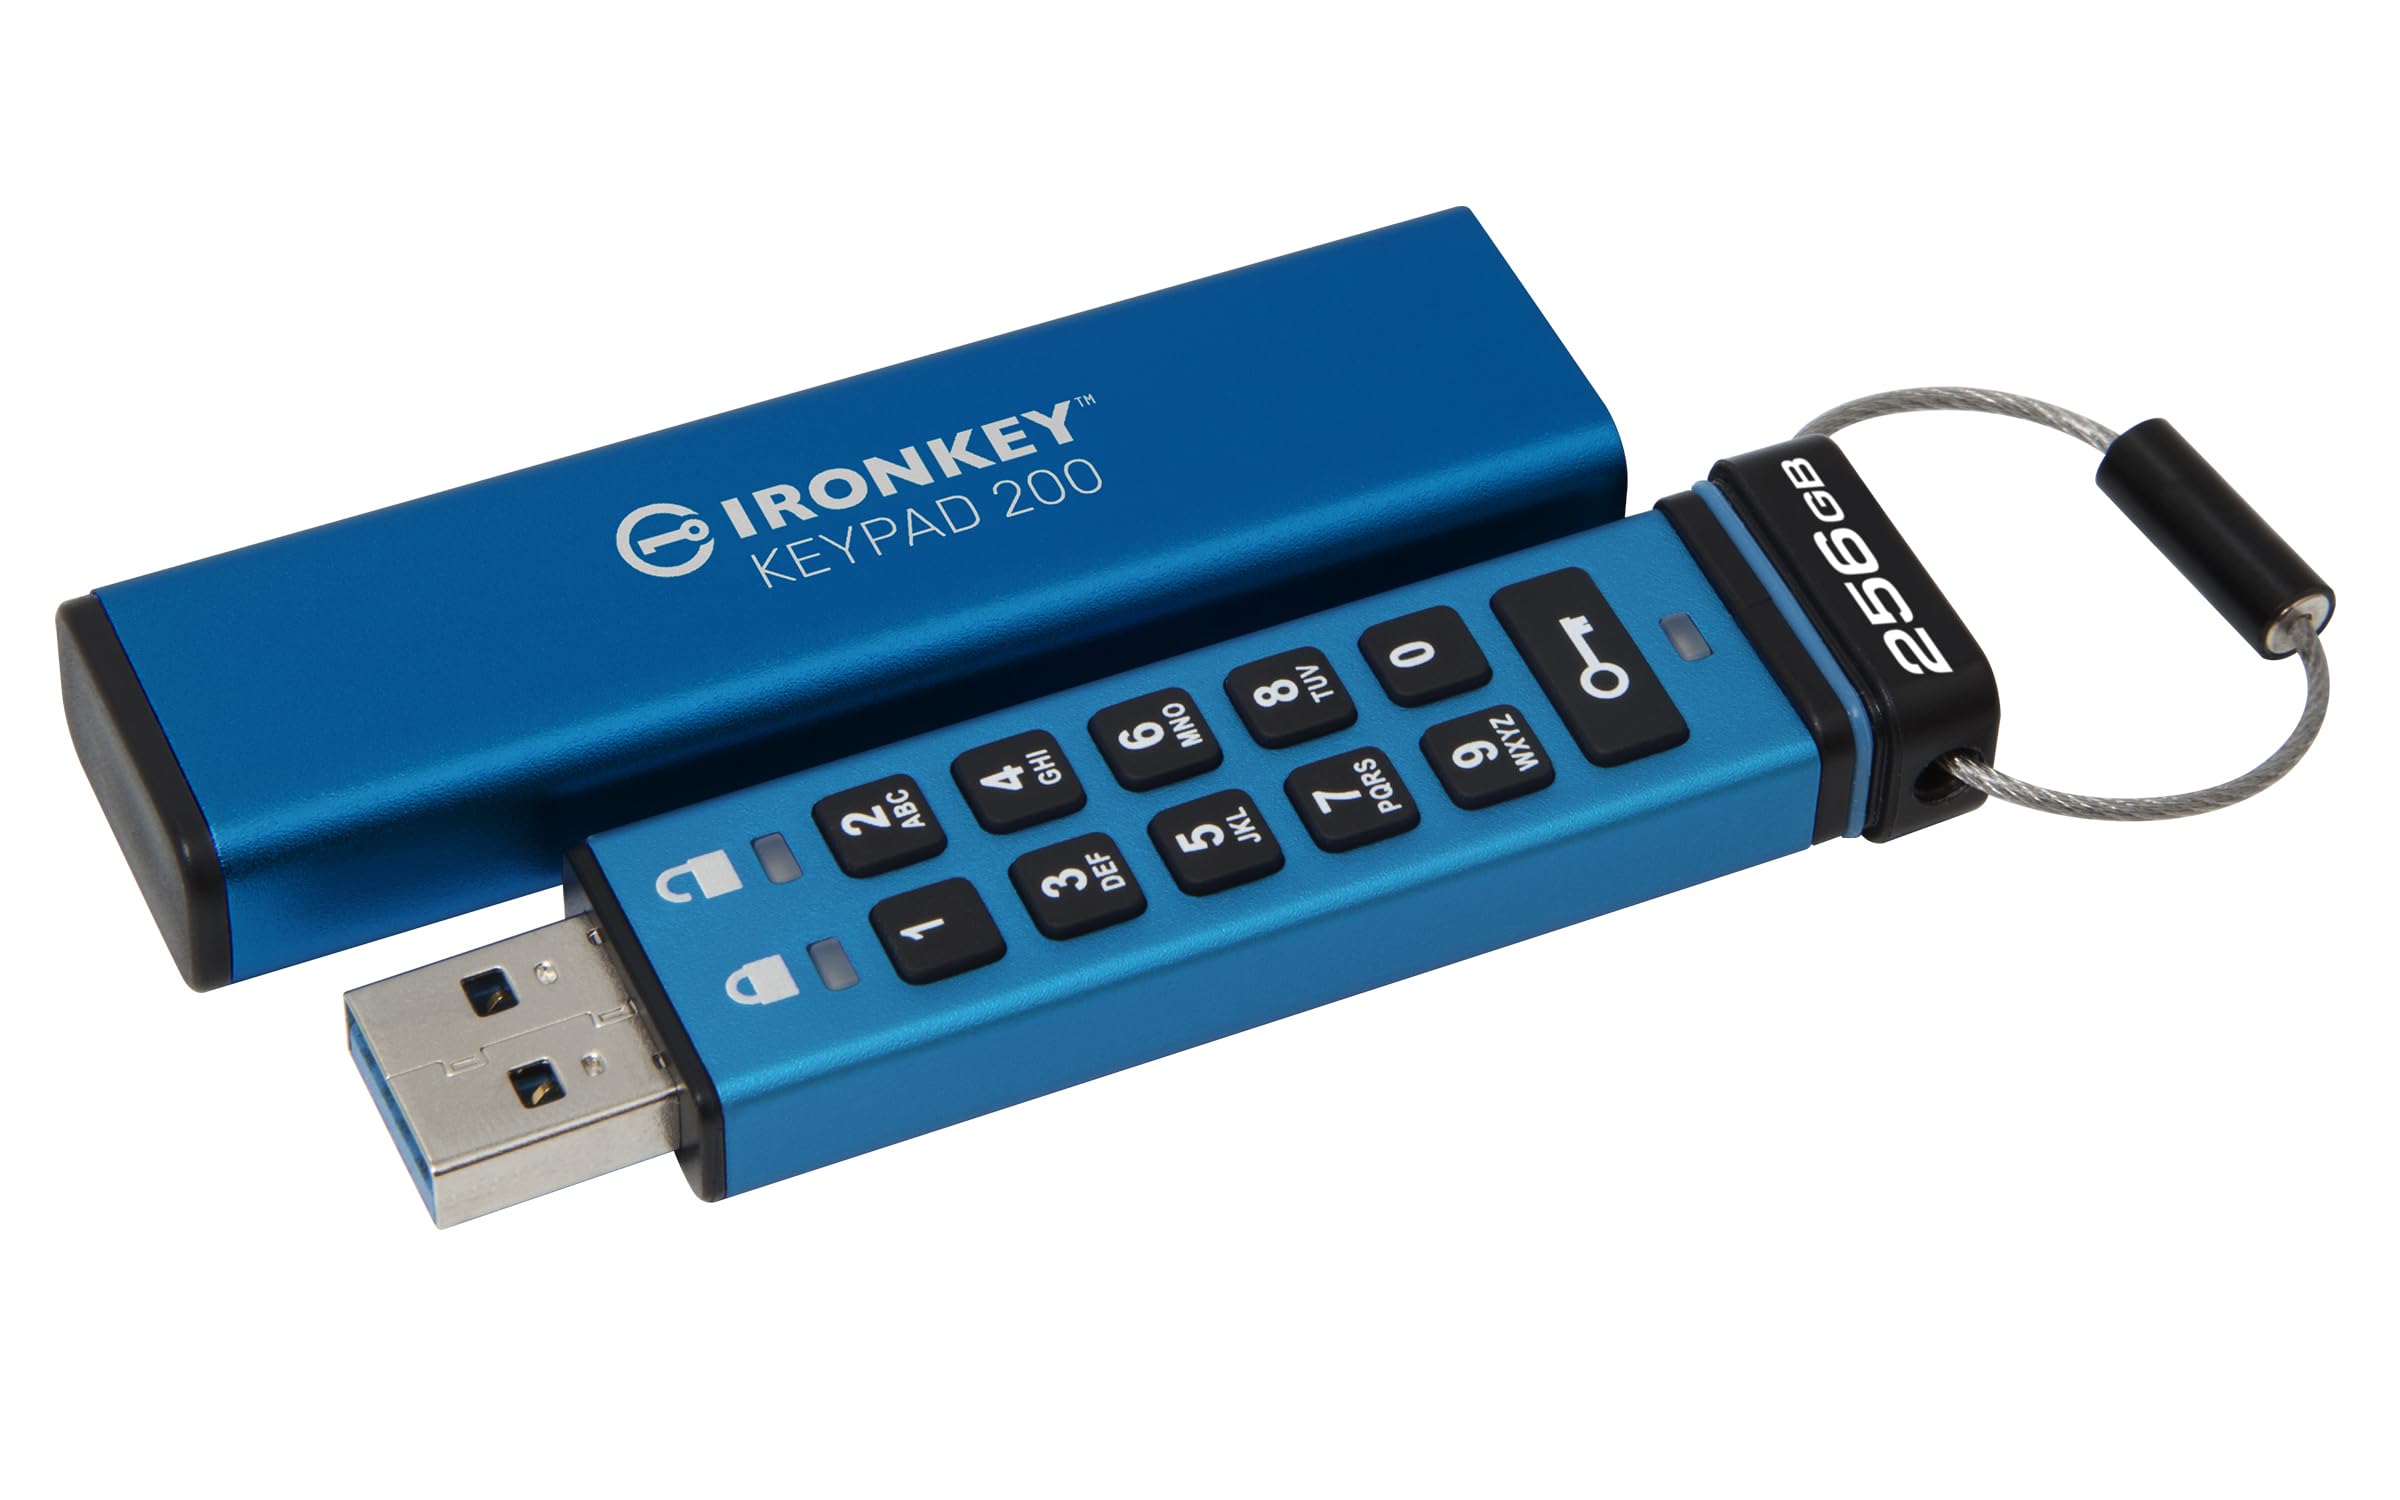 Kingston Ironkey Keypad 200 USB-A 256GB Encrypted Flash Drive | OS Independent | FIPS 140-3 Level 3 | XTS-AES 256-bit | BadUSB and Brute Force Protection | Multi-Pin Option | IKKP200/256GB